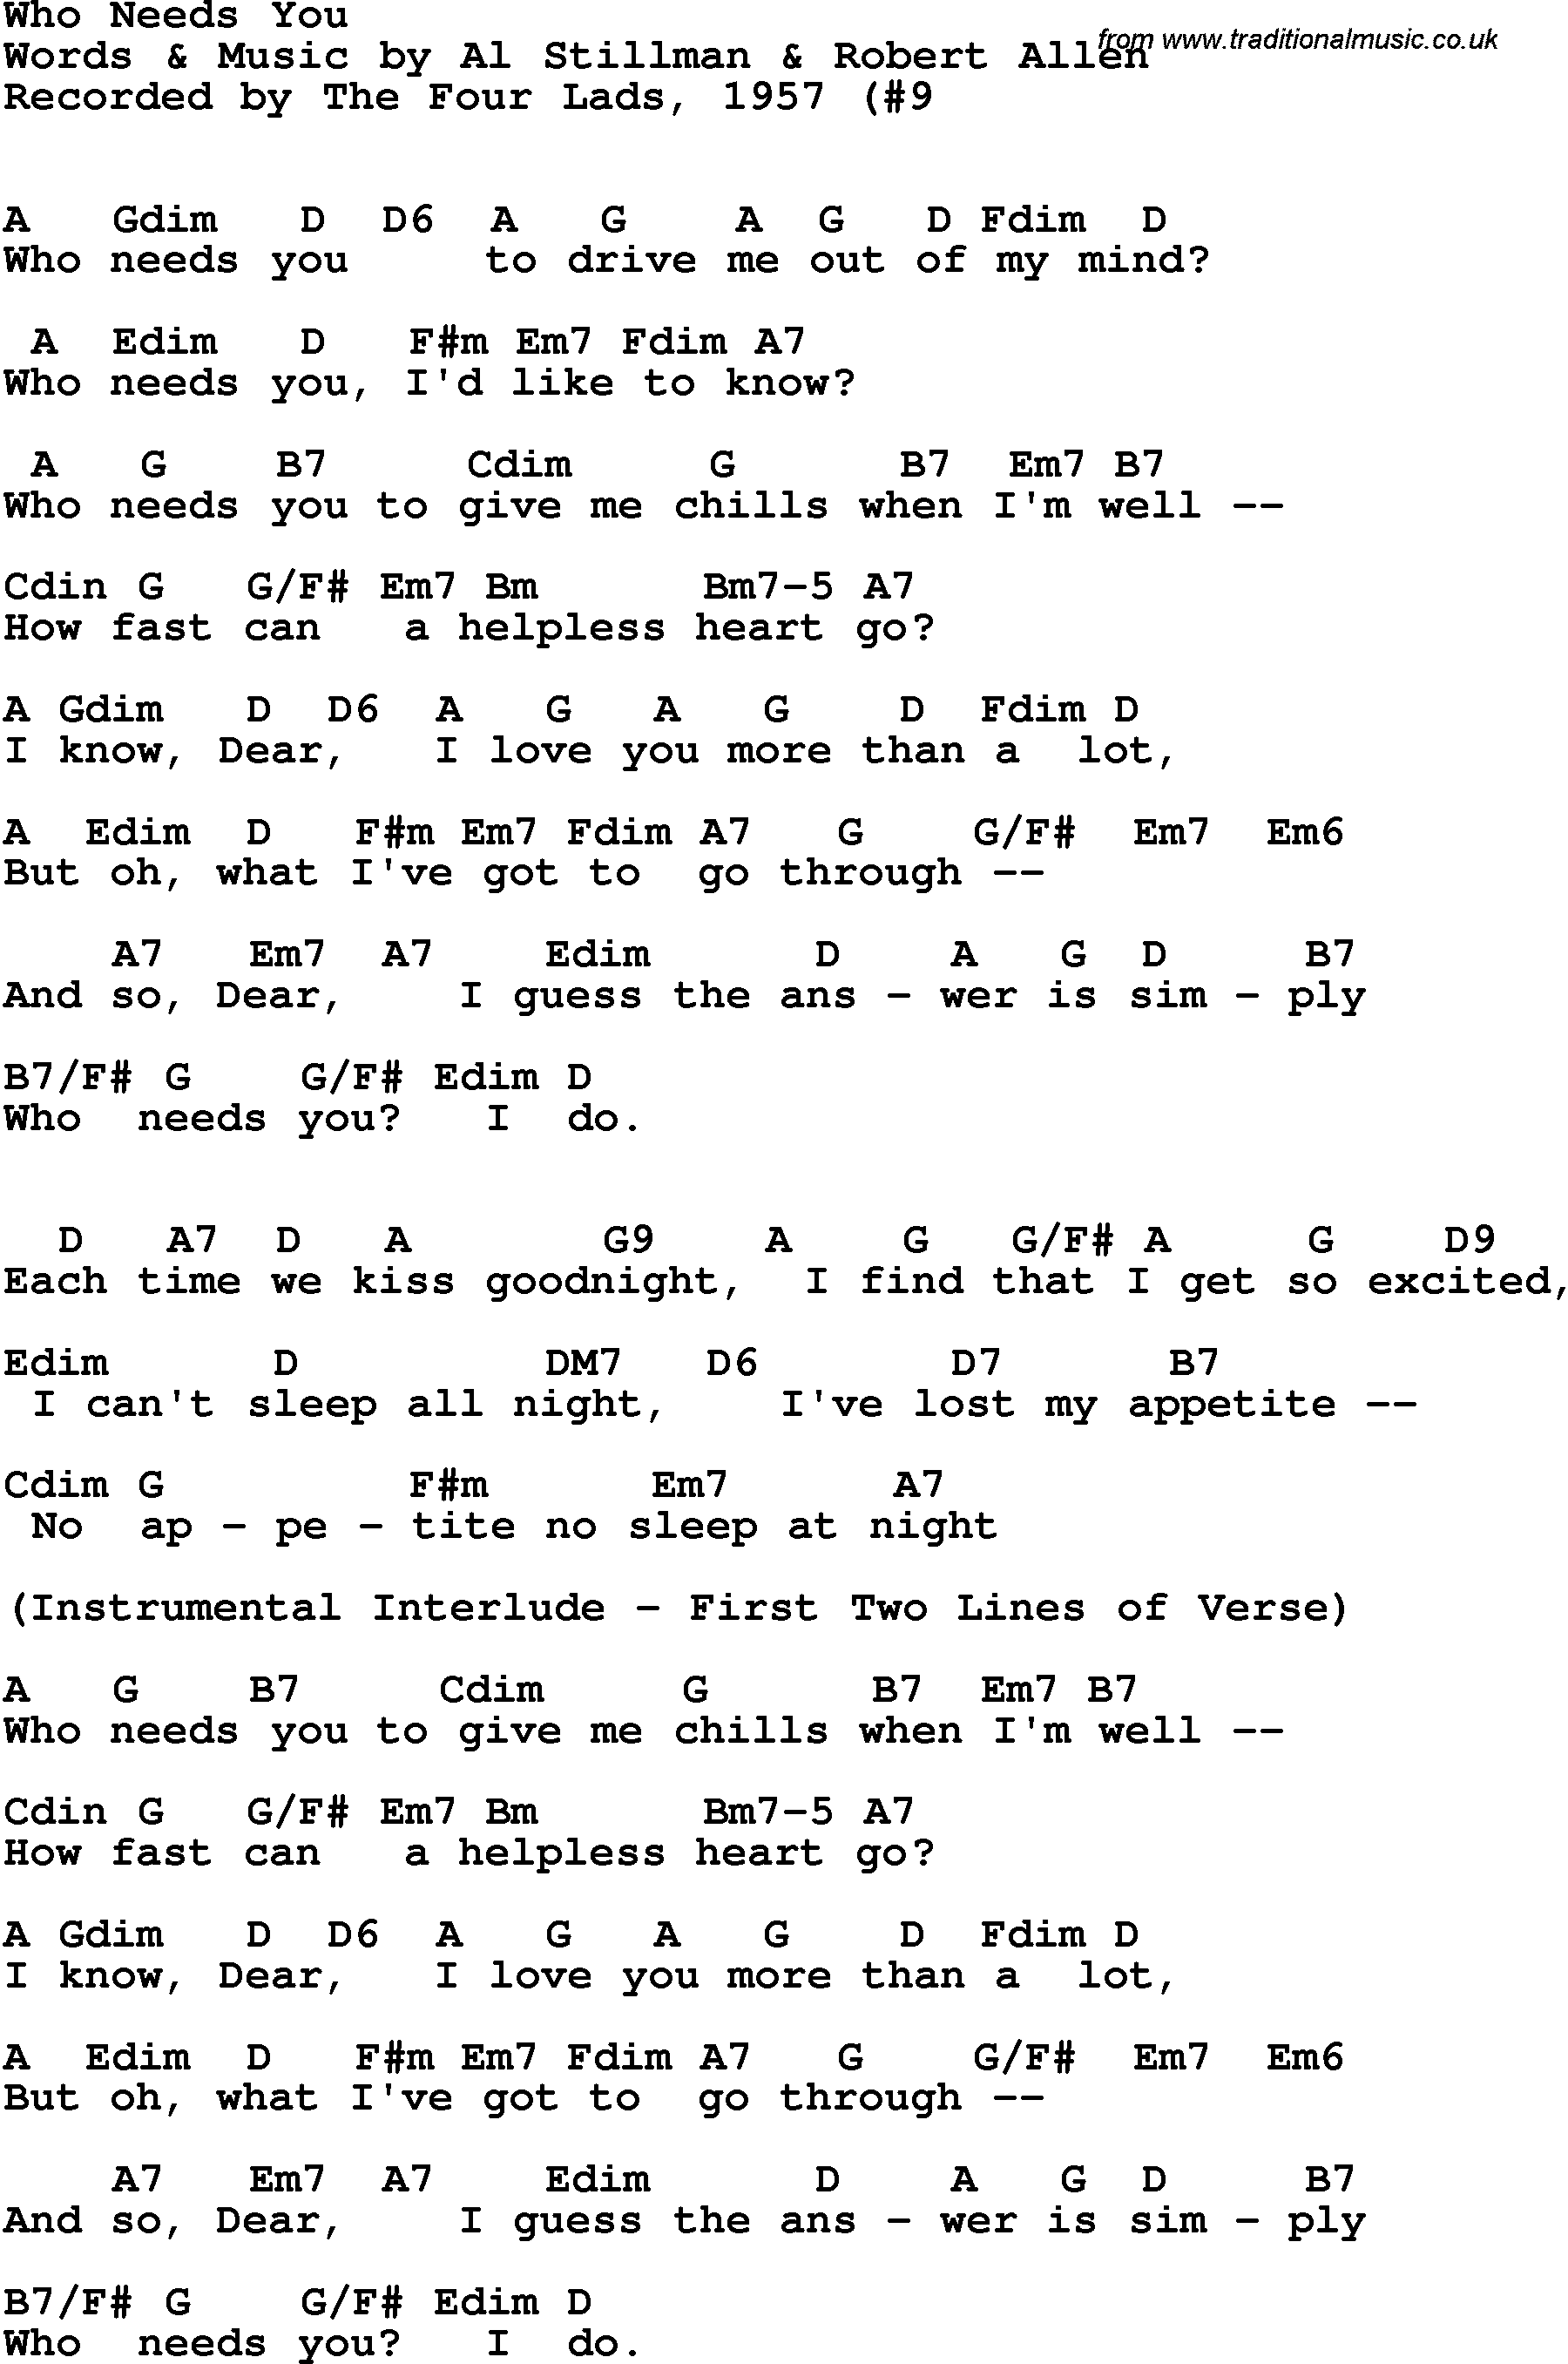 Song Lyrics with guitar chords for Who Needs You - The Four Lads, 1957